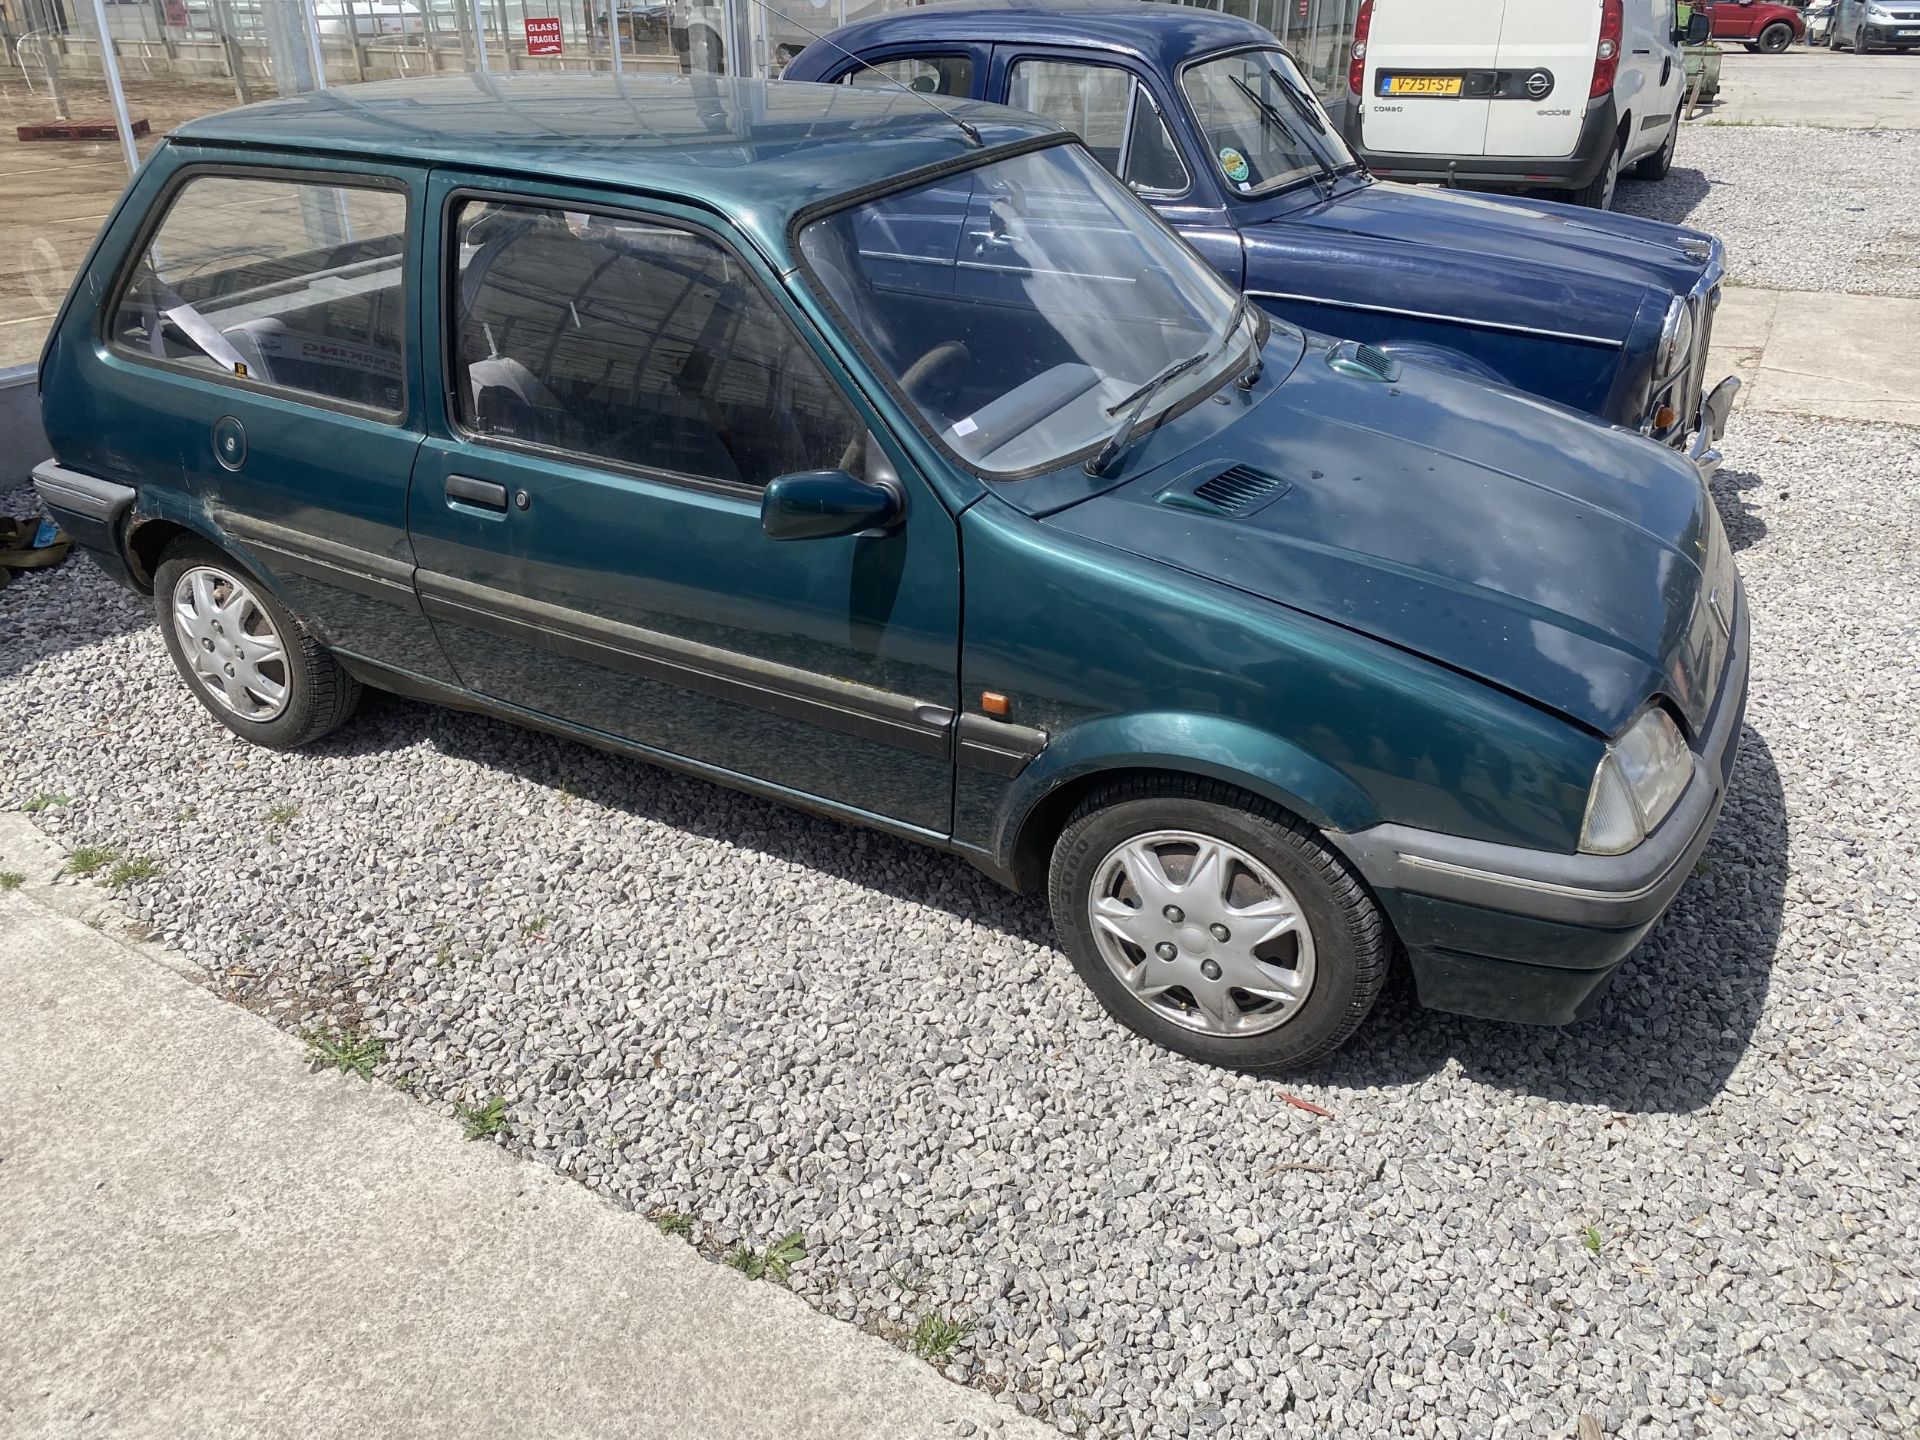 A DIESEL ROVER METRO 1.4LD, REGISTRATION M630OOF WITH APPROX 71000 MILES ON THE CLOCK V5 PAPERWORK